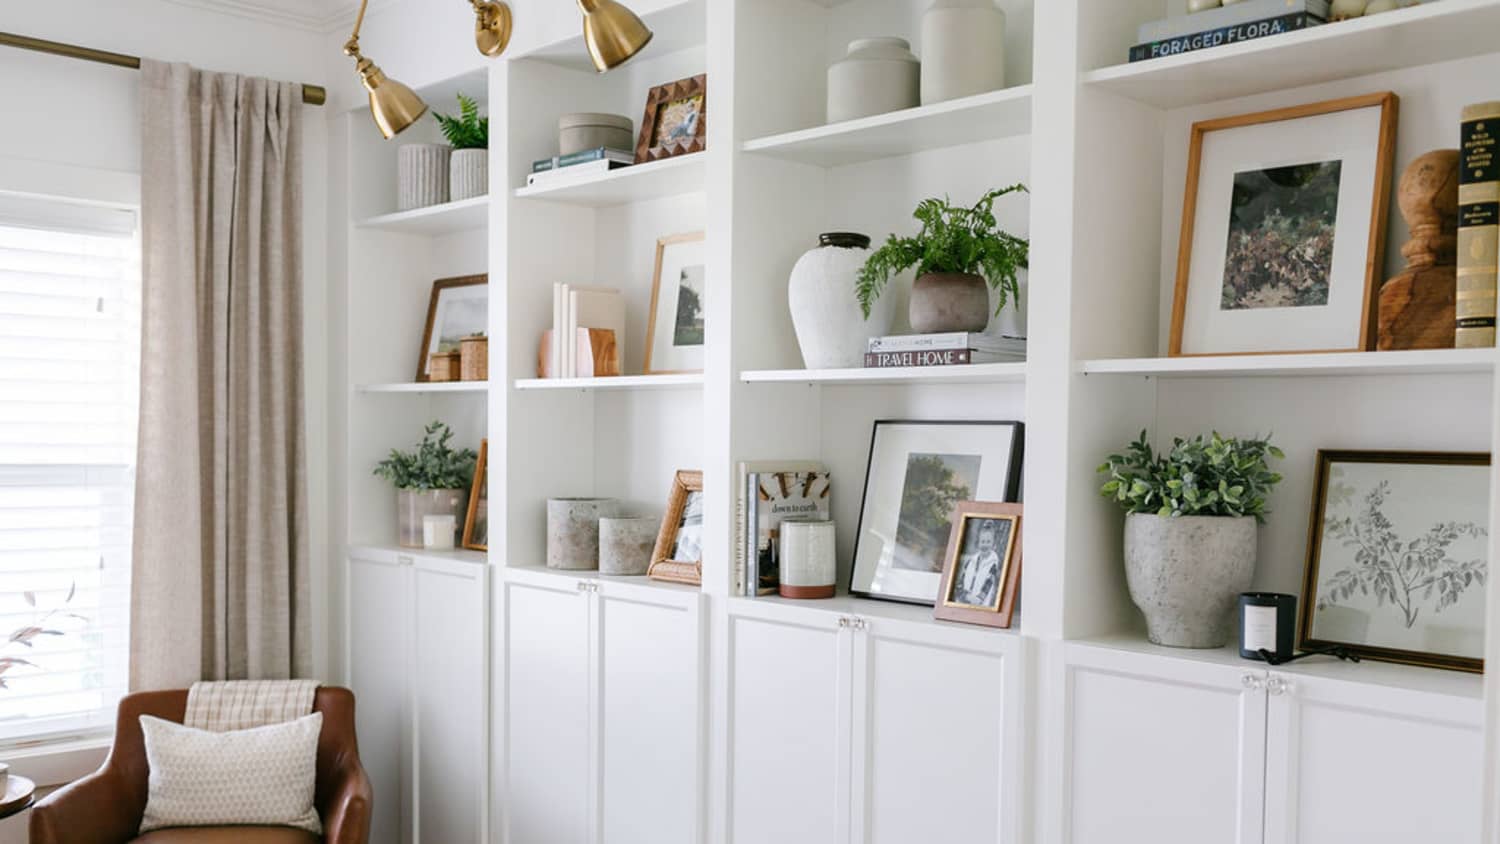 13 Of Our Favorite Small-Space Storage Solutions From Ikea